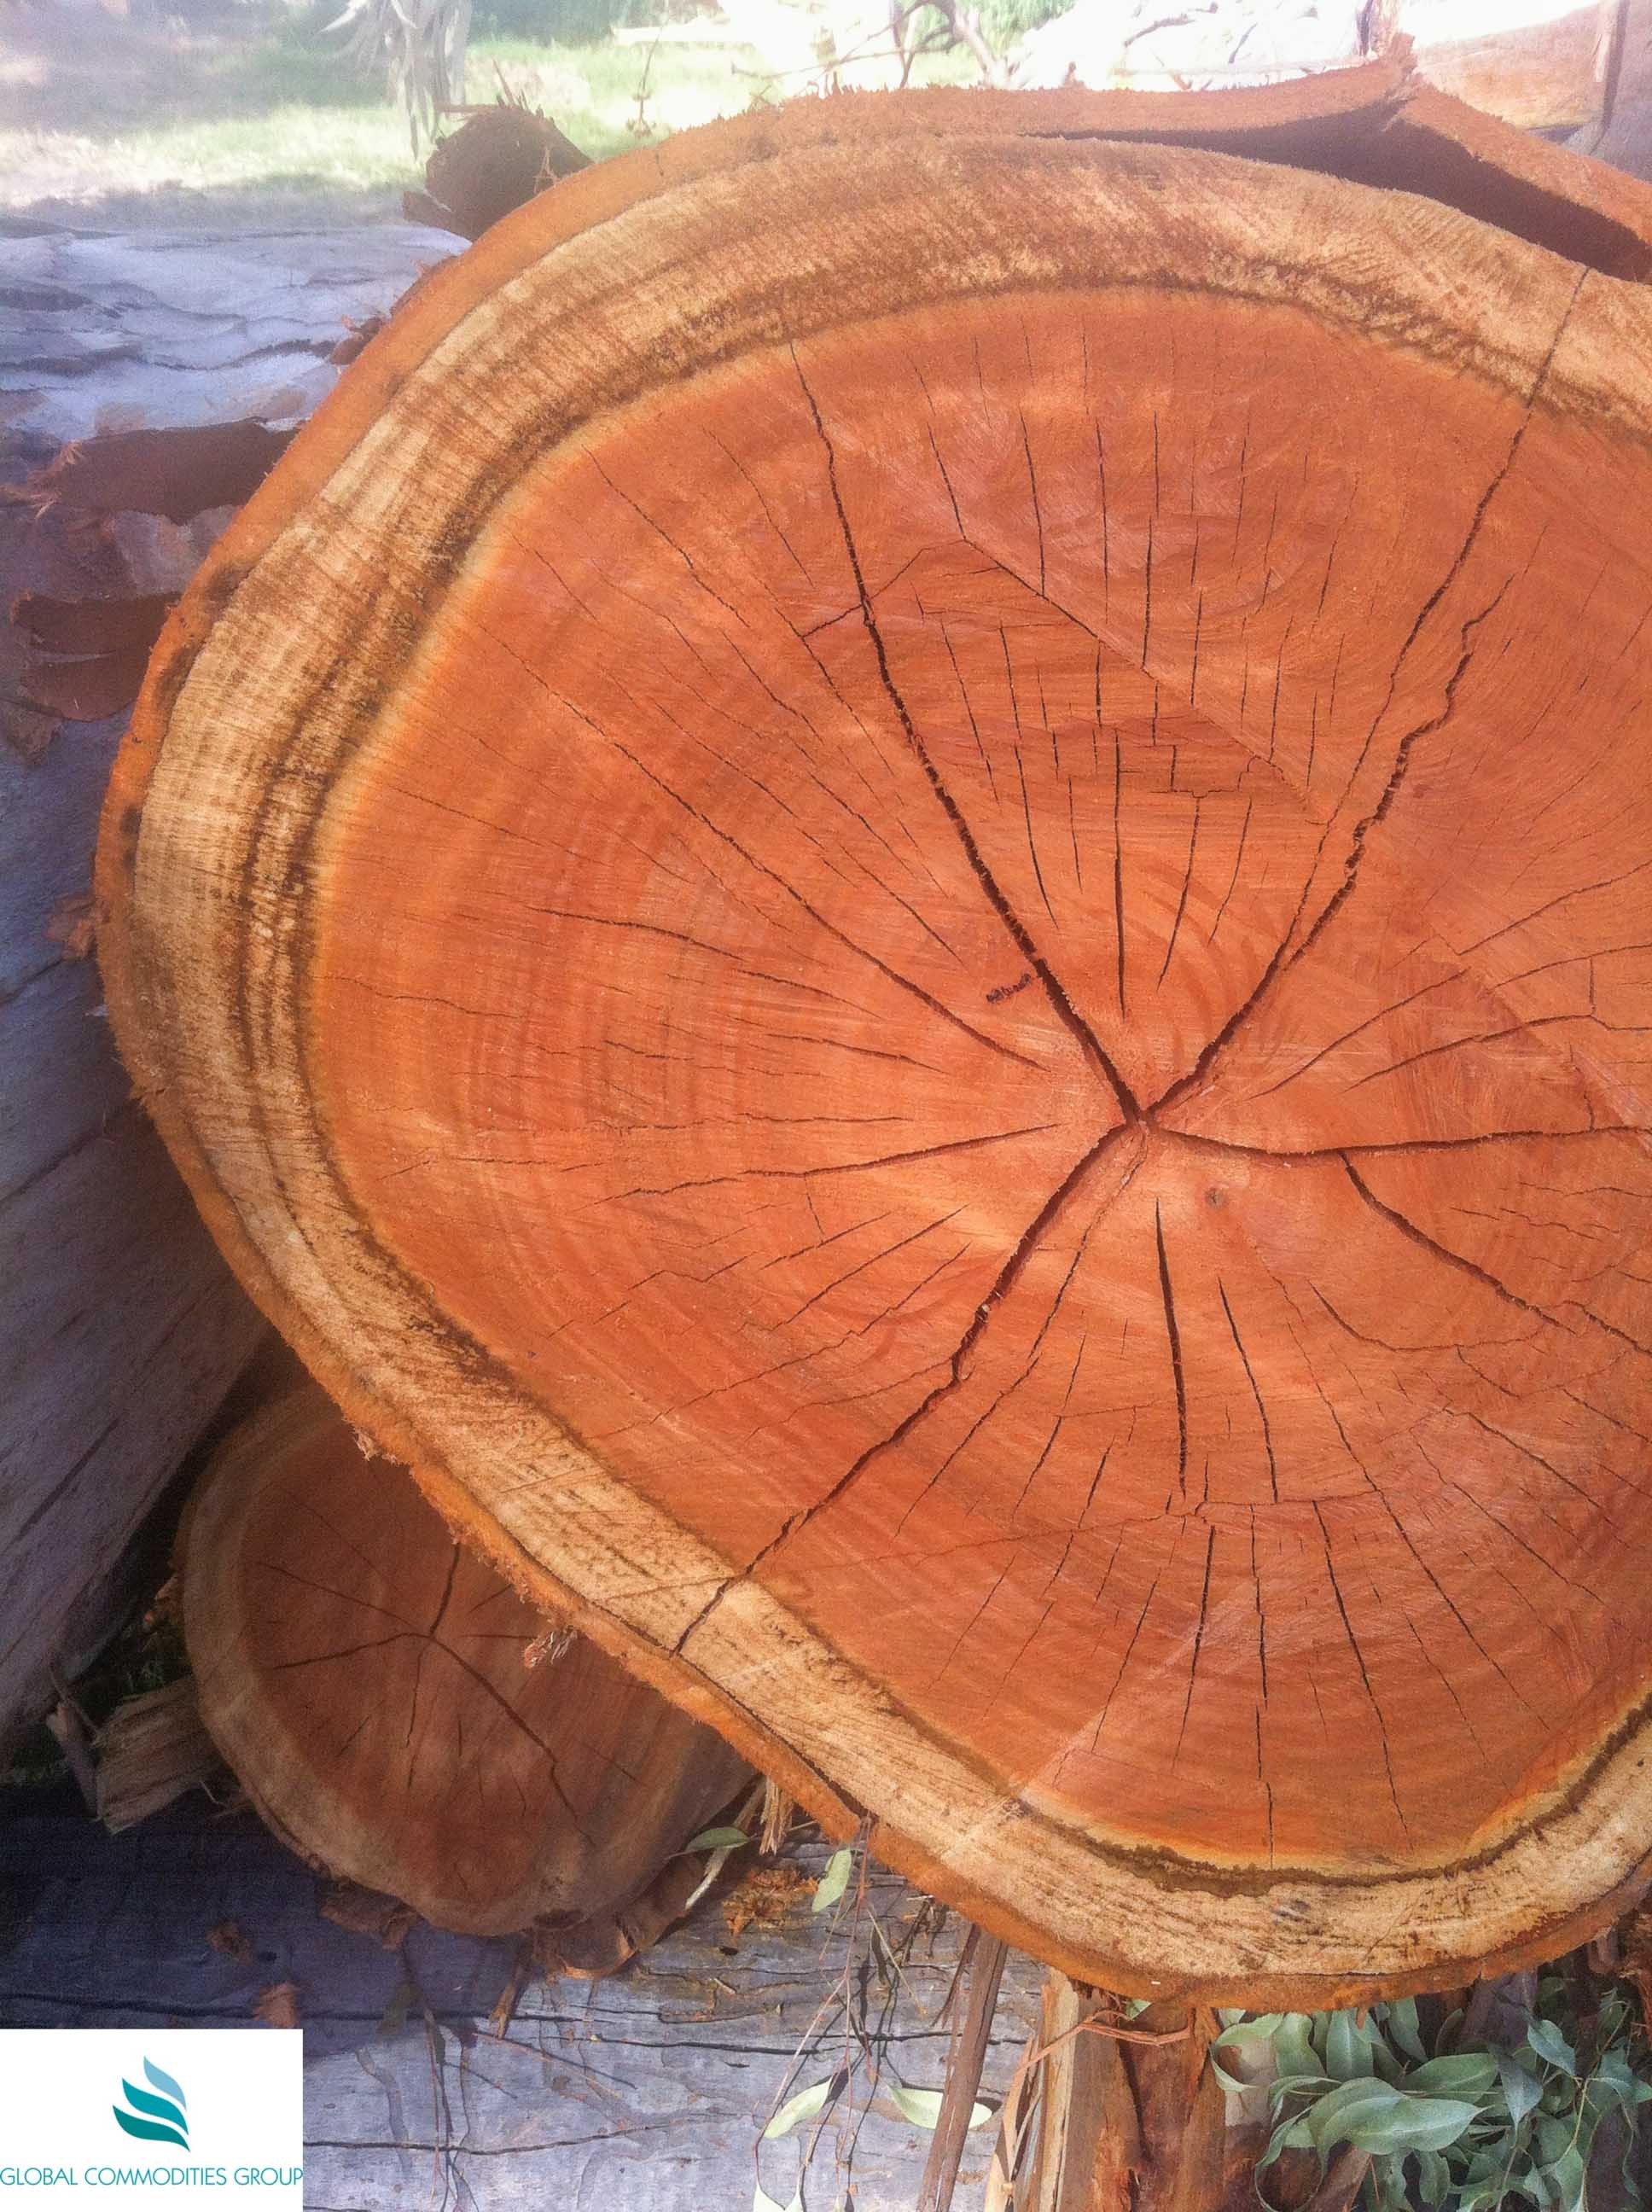 Hardwoods from South Africa | Timber Trading | Global Commodities